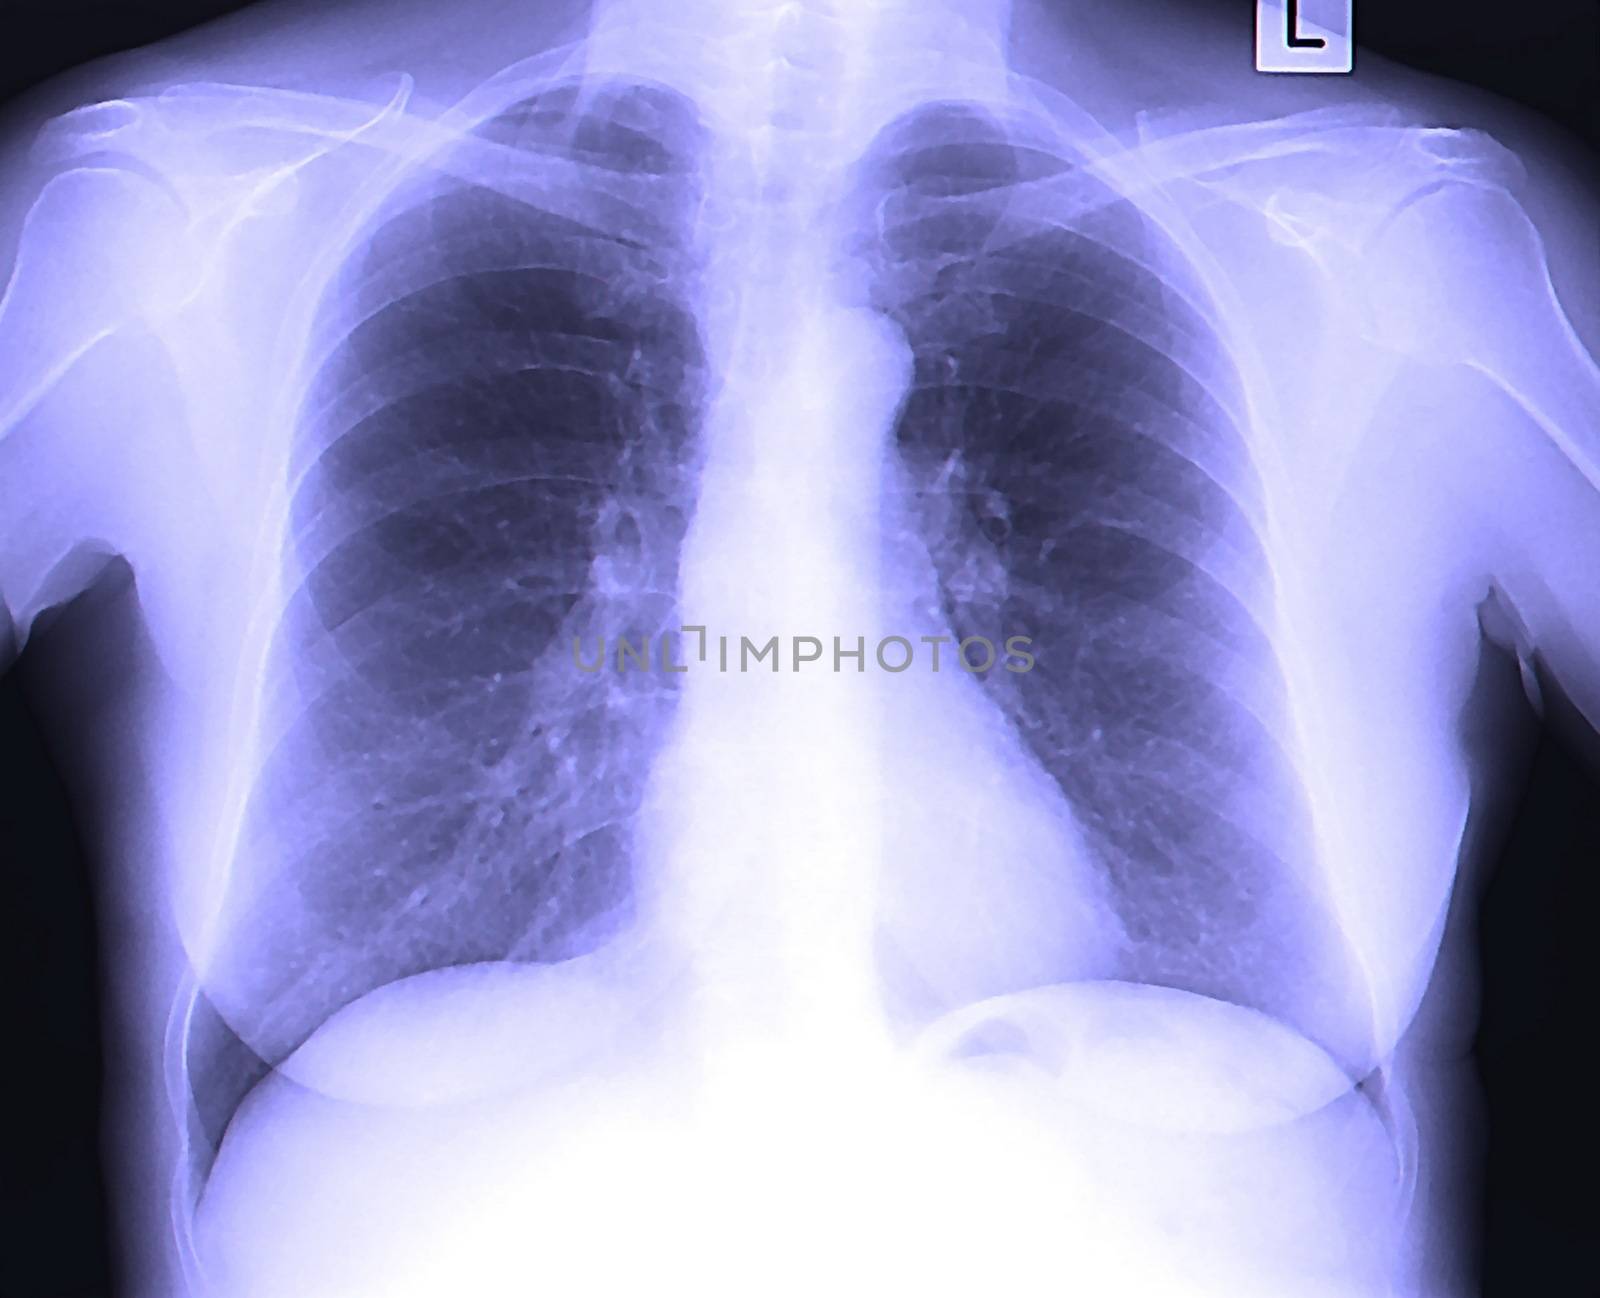 A chest x-ray image for a medical diagnosis